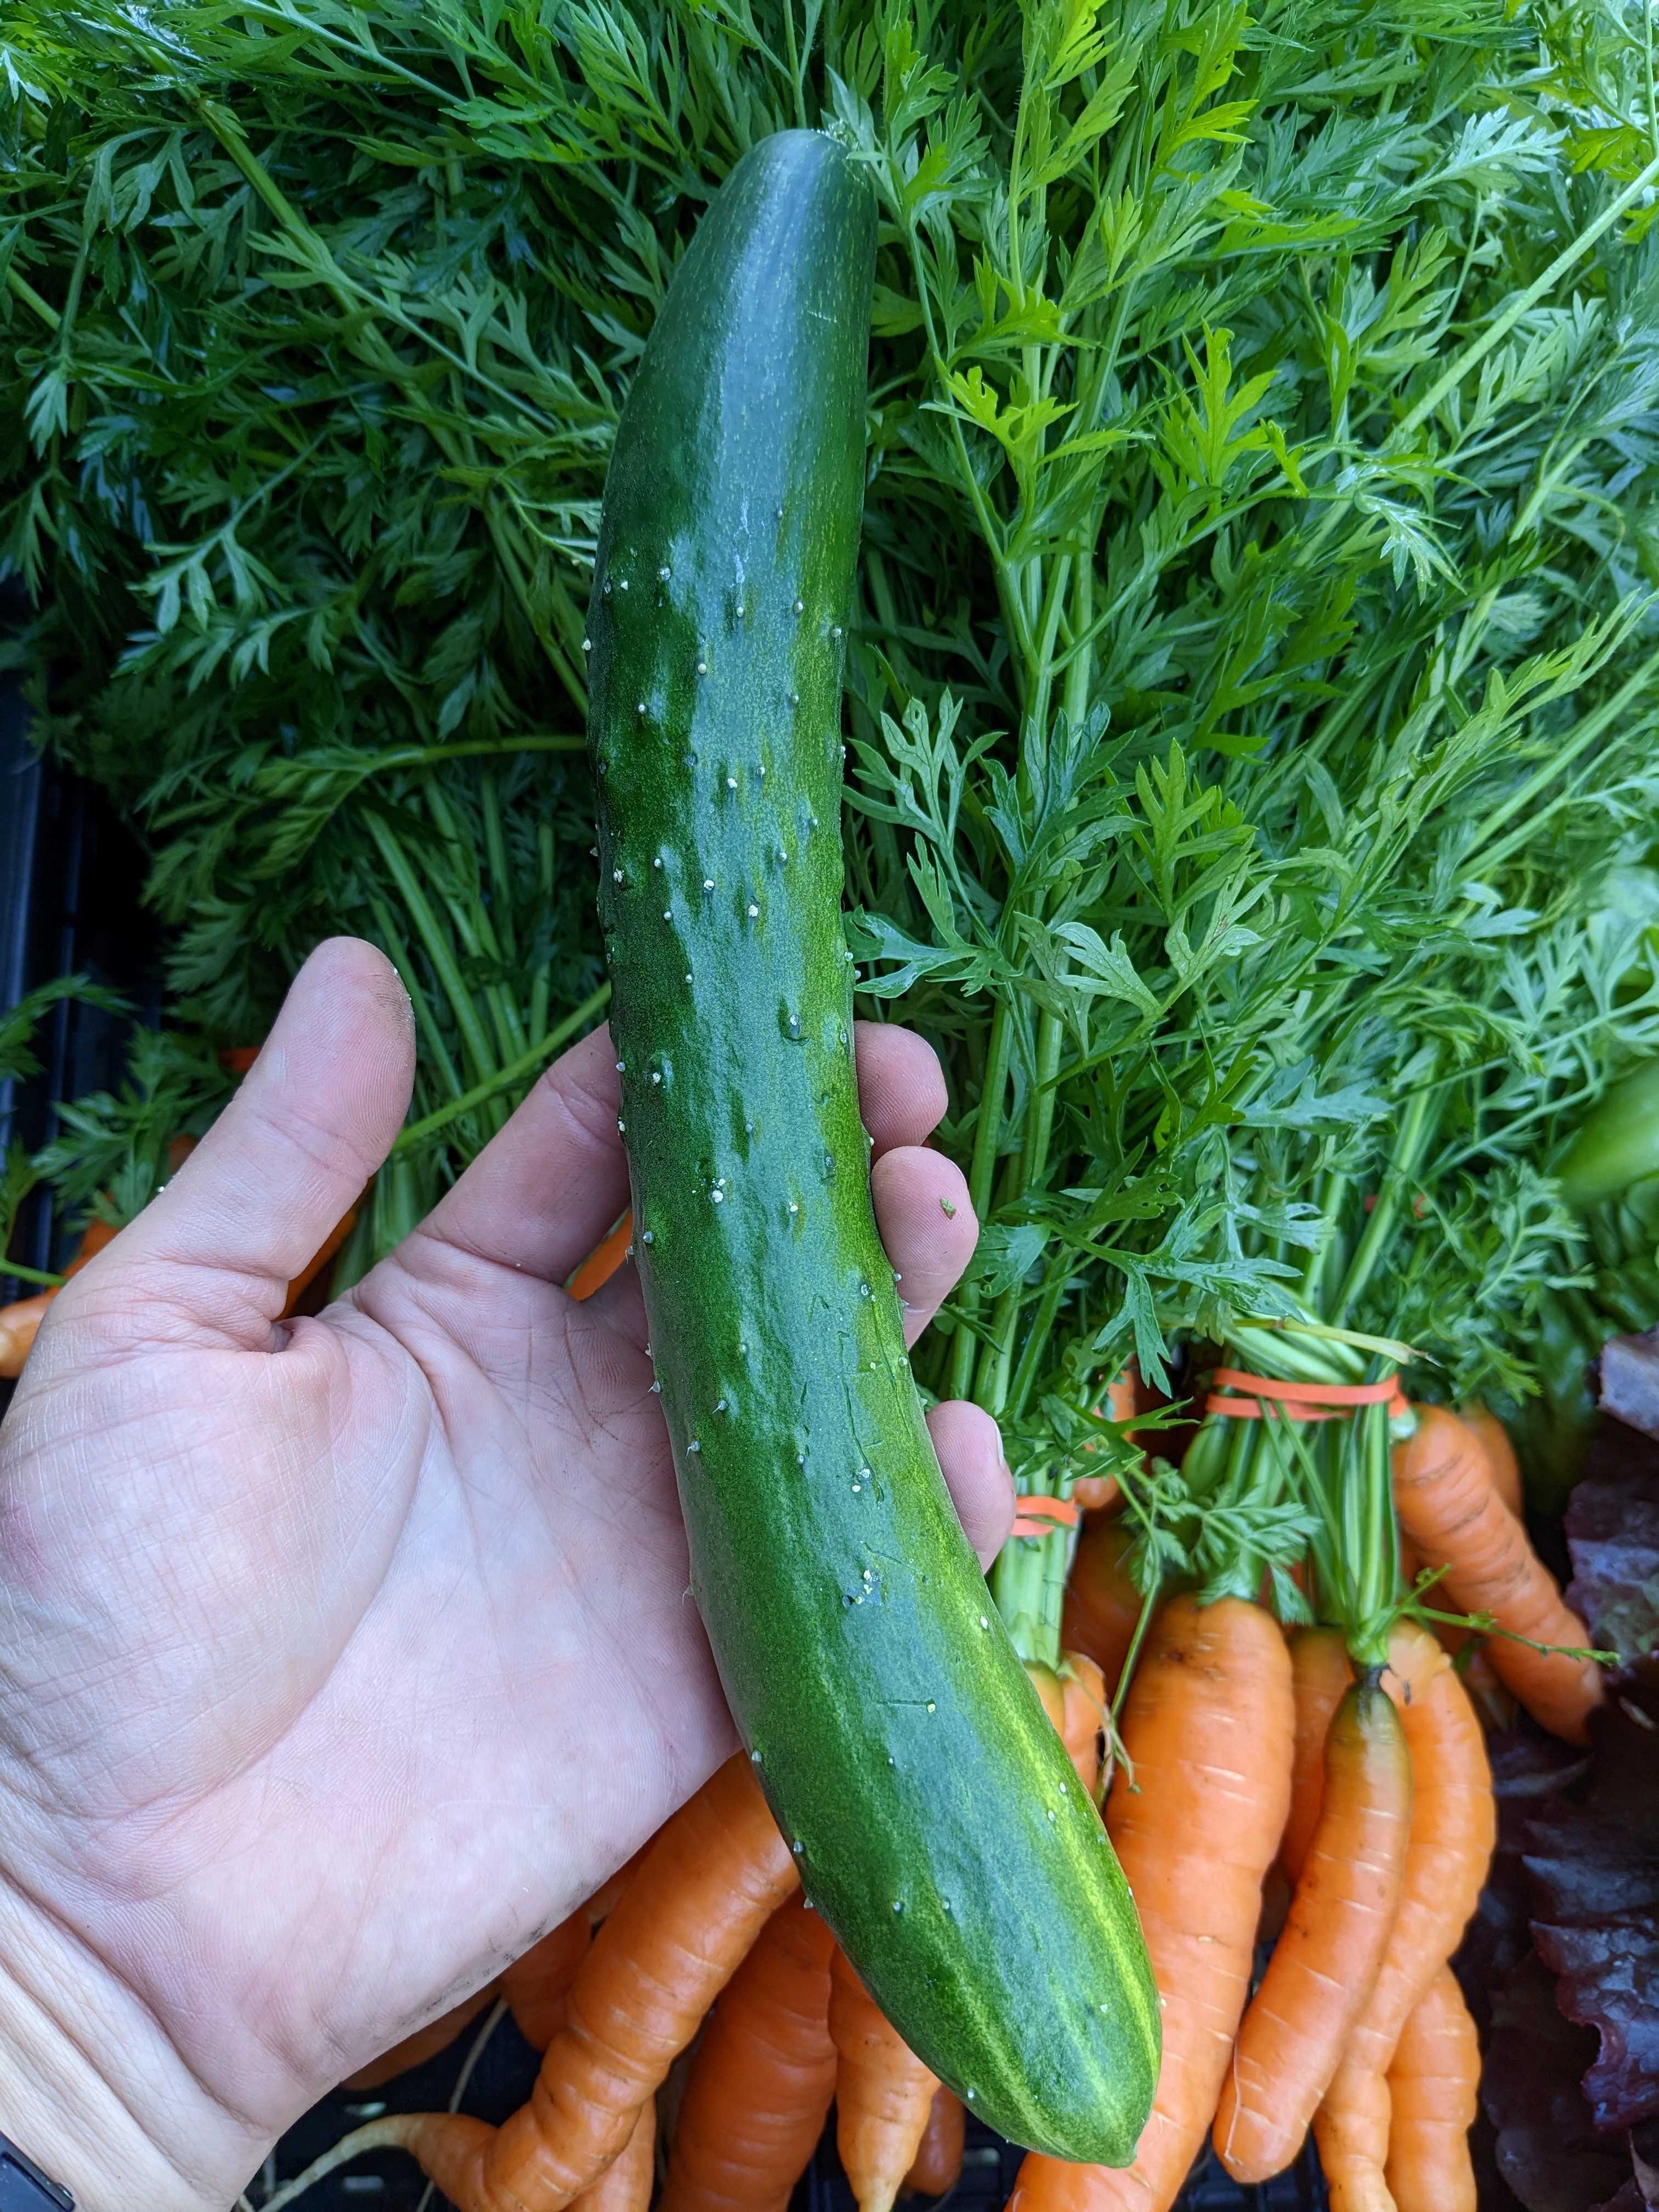 A picture of Cucumber - Tasty Green